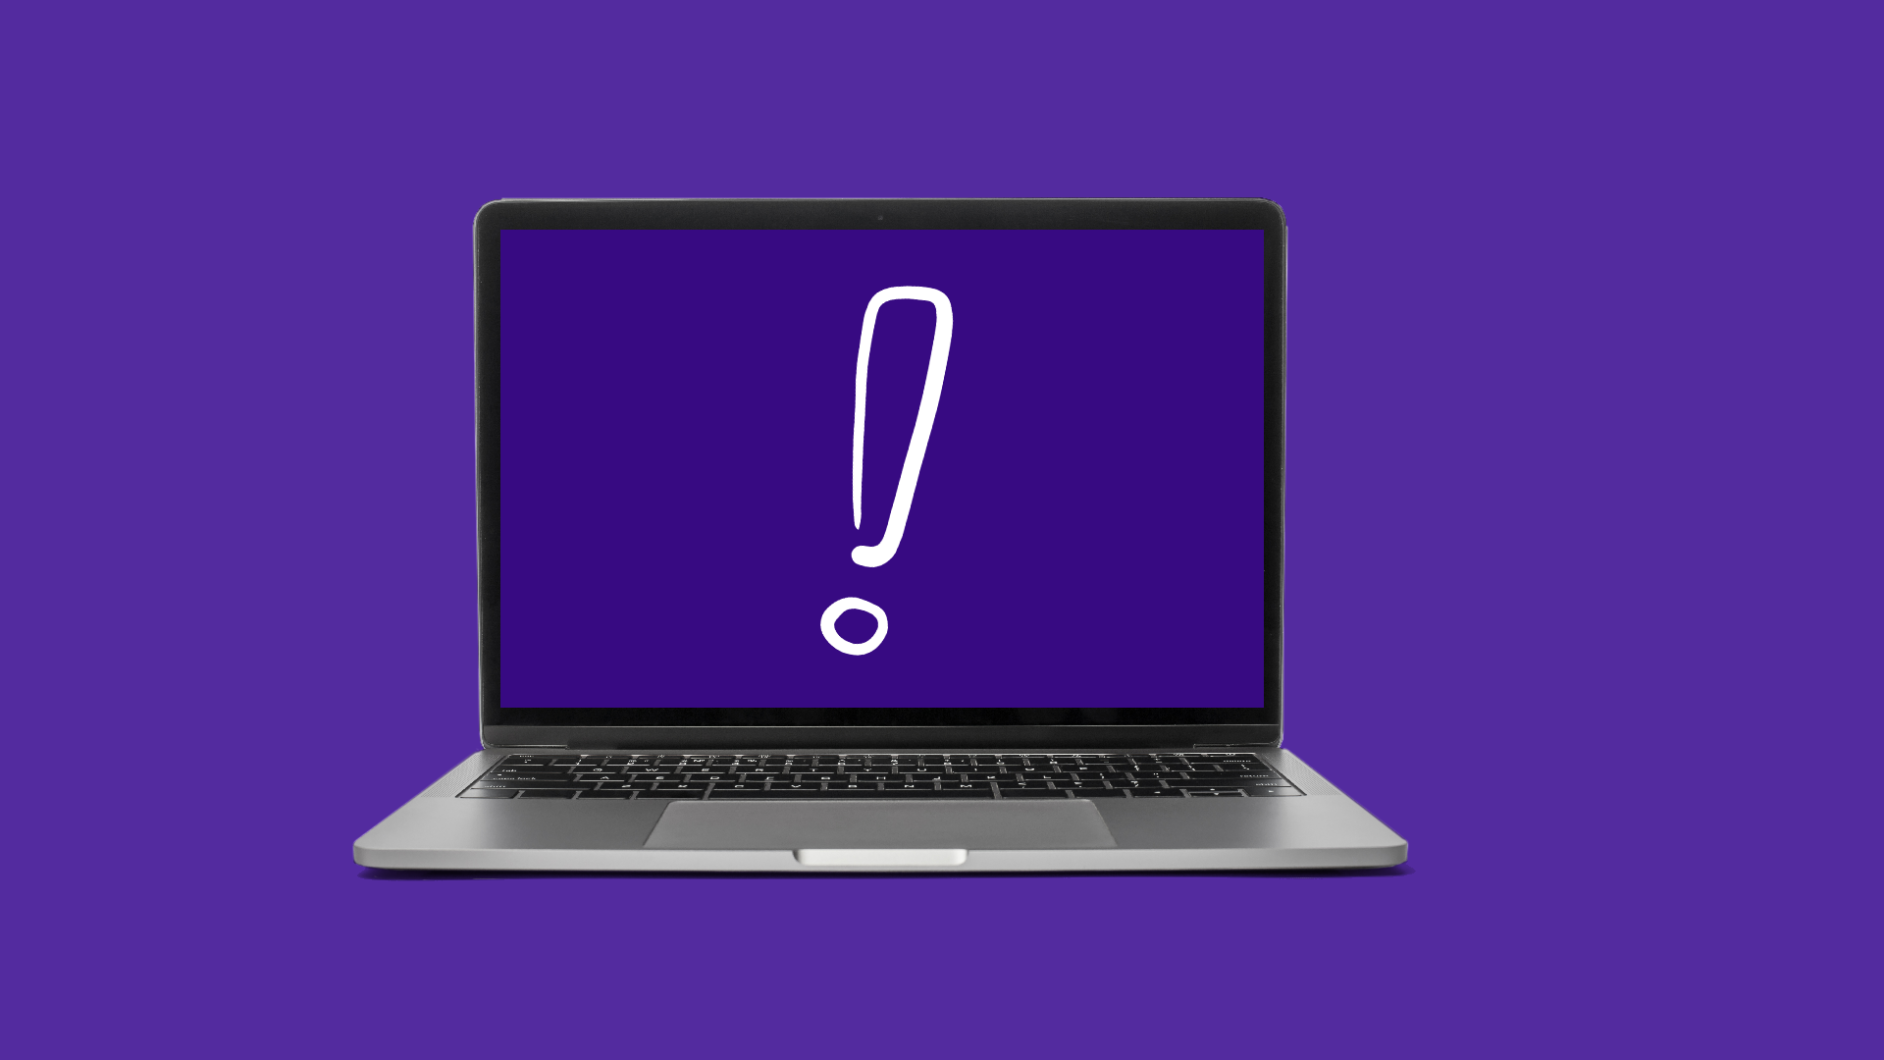 A laptop with an exclamation represents cyberchondria